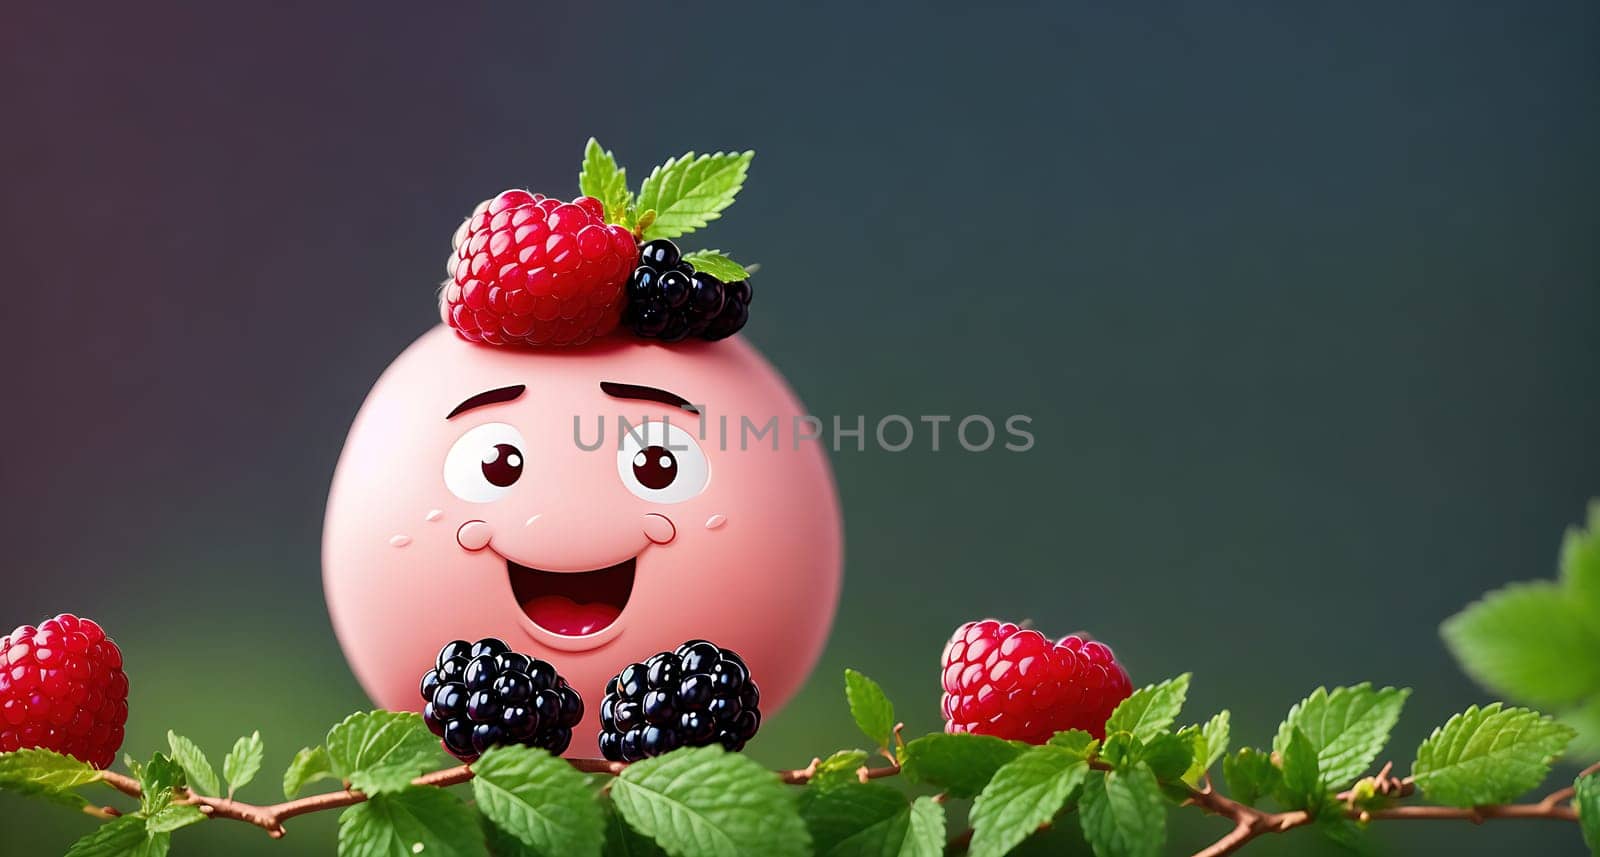 The image shows a cartoon egg with a berry on its head, sitting on a branch with leaves and berries around it.